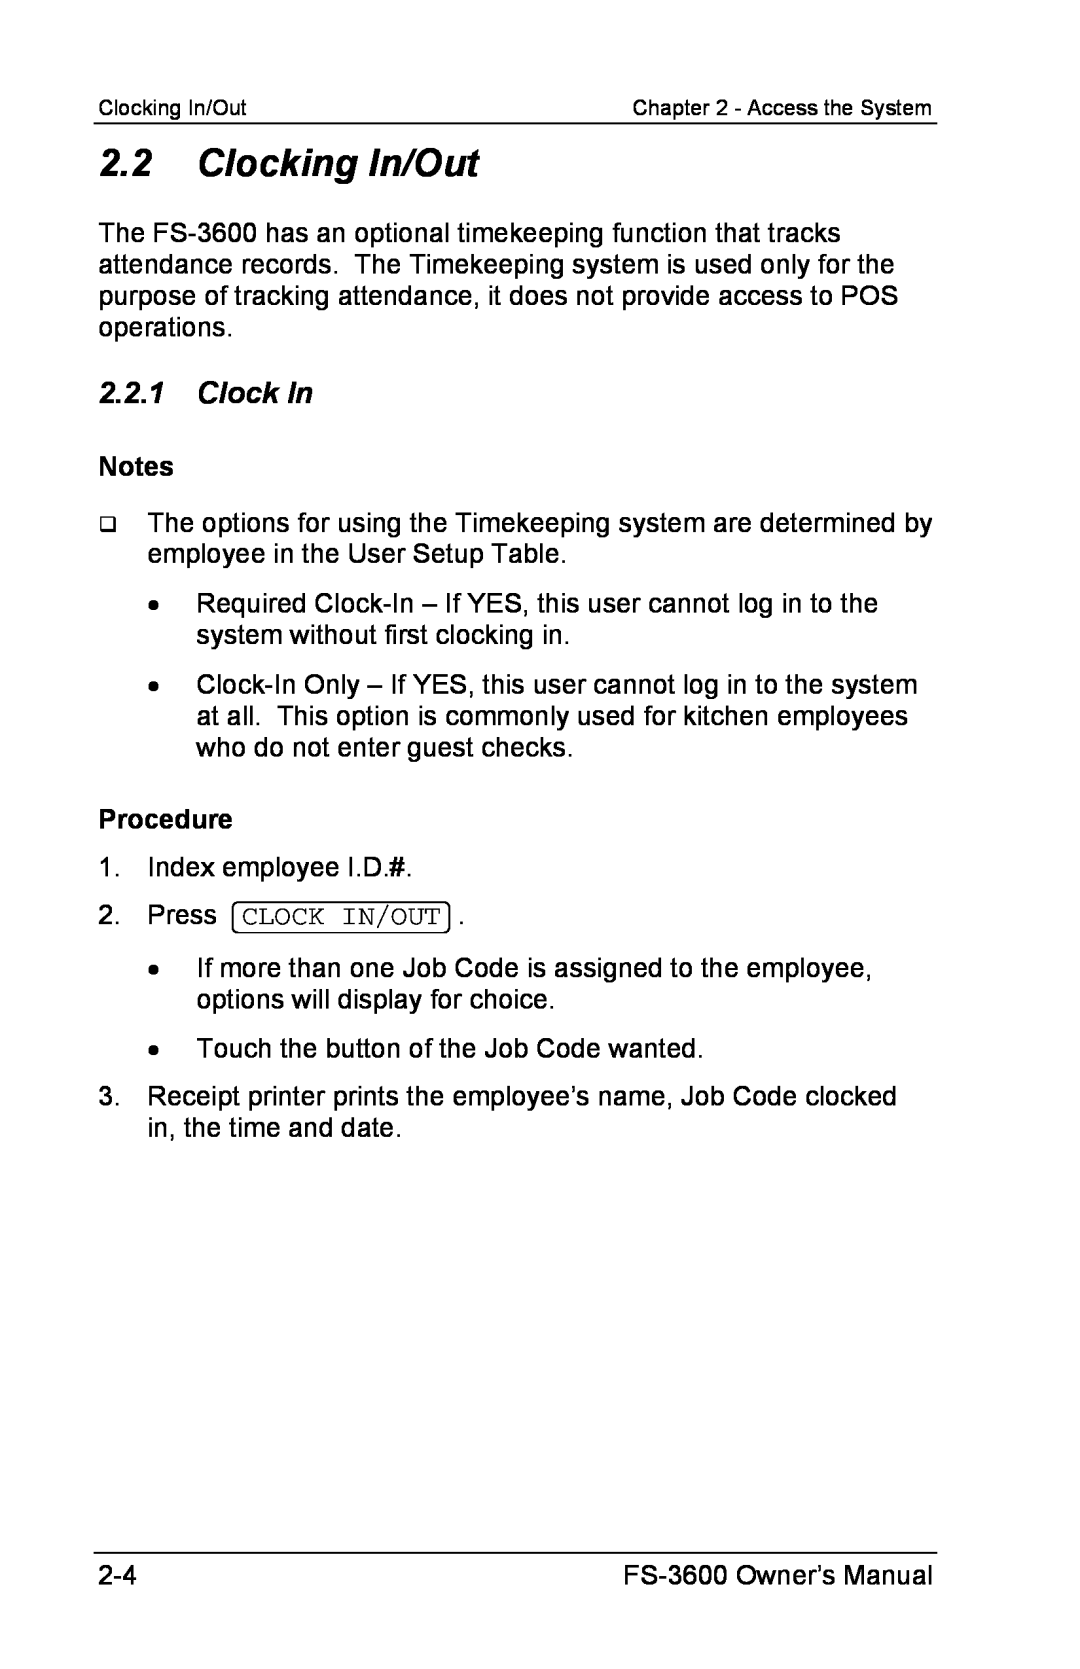 Toshiba FS-3600 owner manual 2.2Clocking In/Out, 2.2.1Clock In, Procedure 